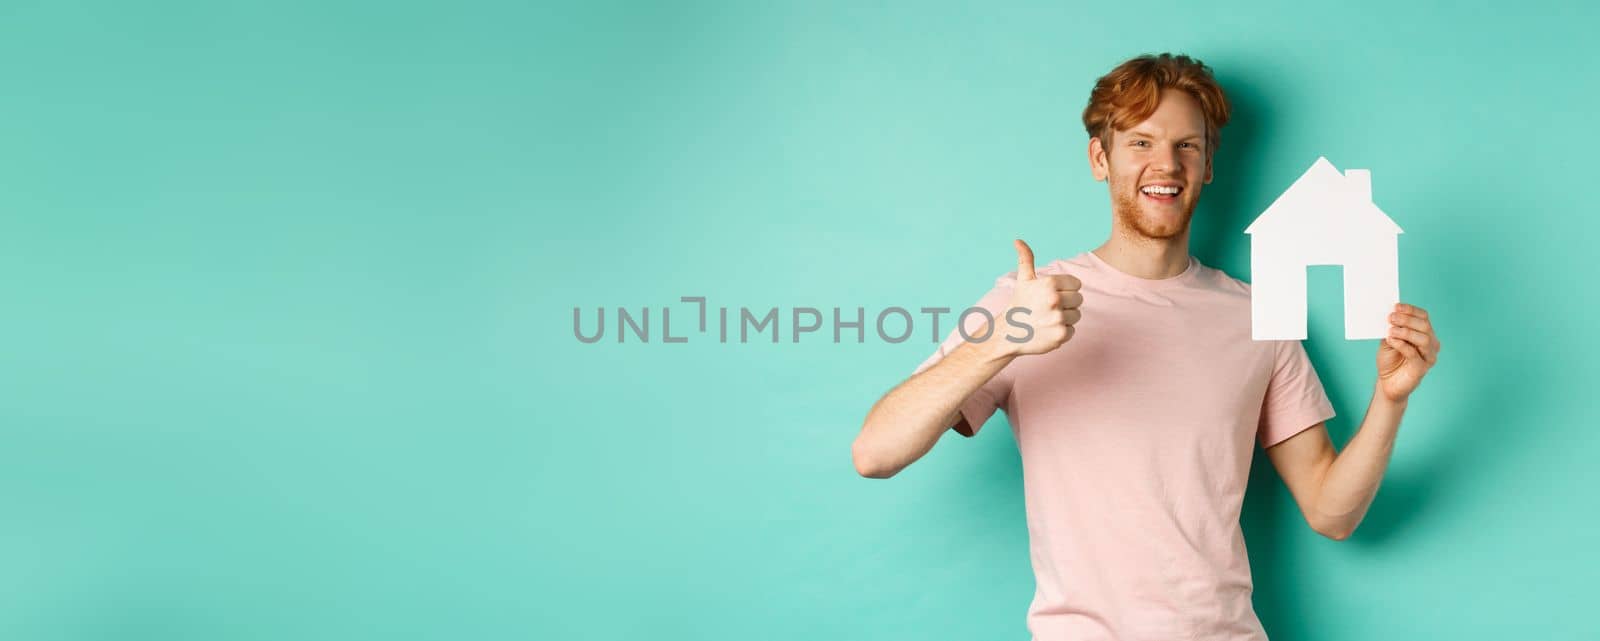 Real estate concept. Young man with red hair, wearing t-shirt, showing paper house cutout and thumb up, recommend agency, standing over turquoise background.